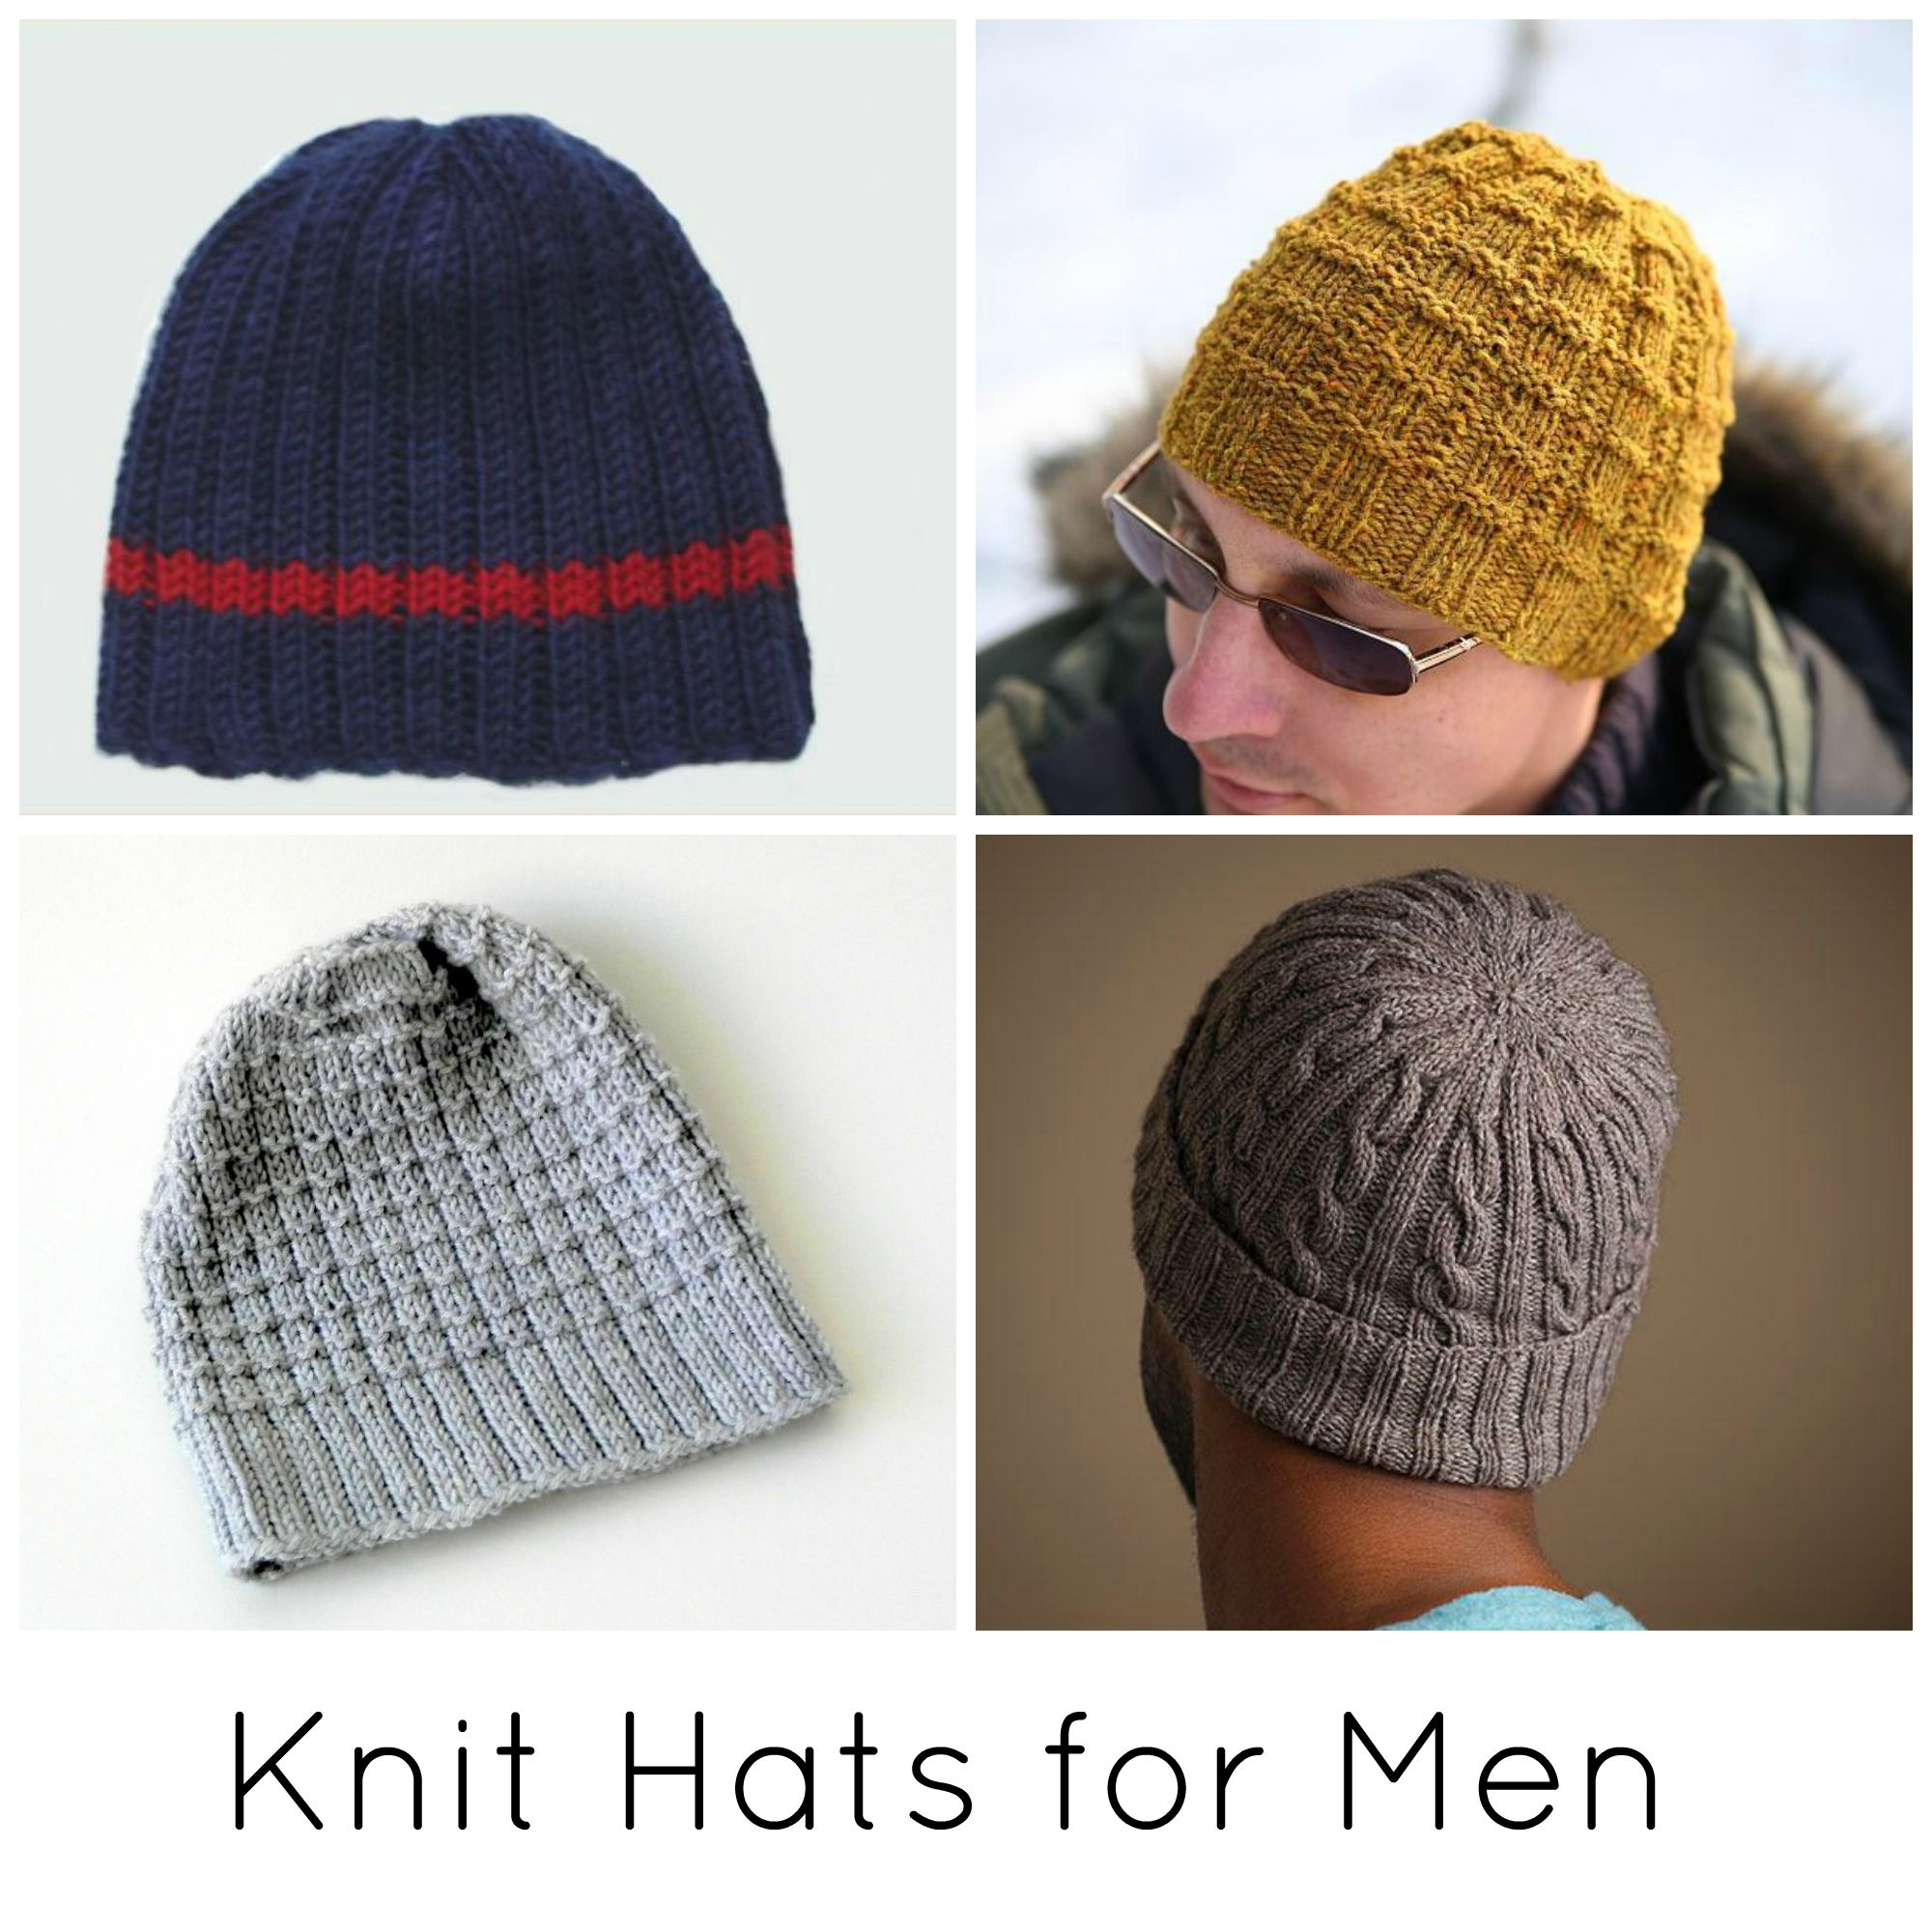 Bulky Knit Hat Pattern Free 8 Knit Hats For Men From Adventurous To Classic